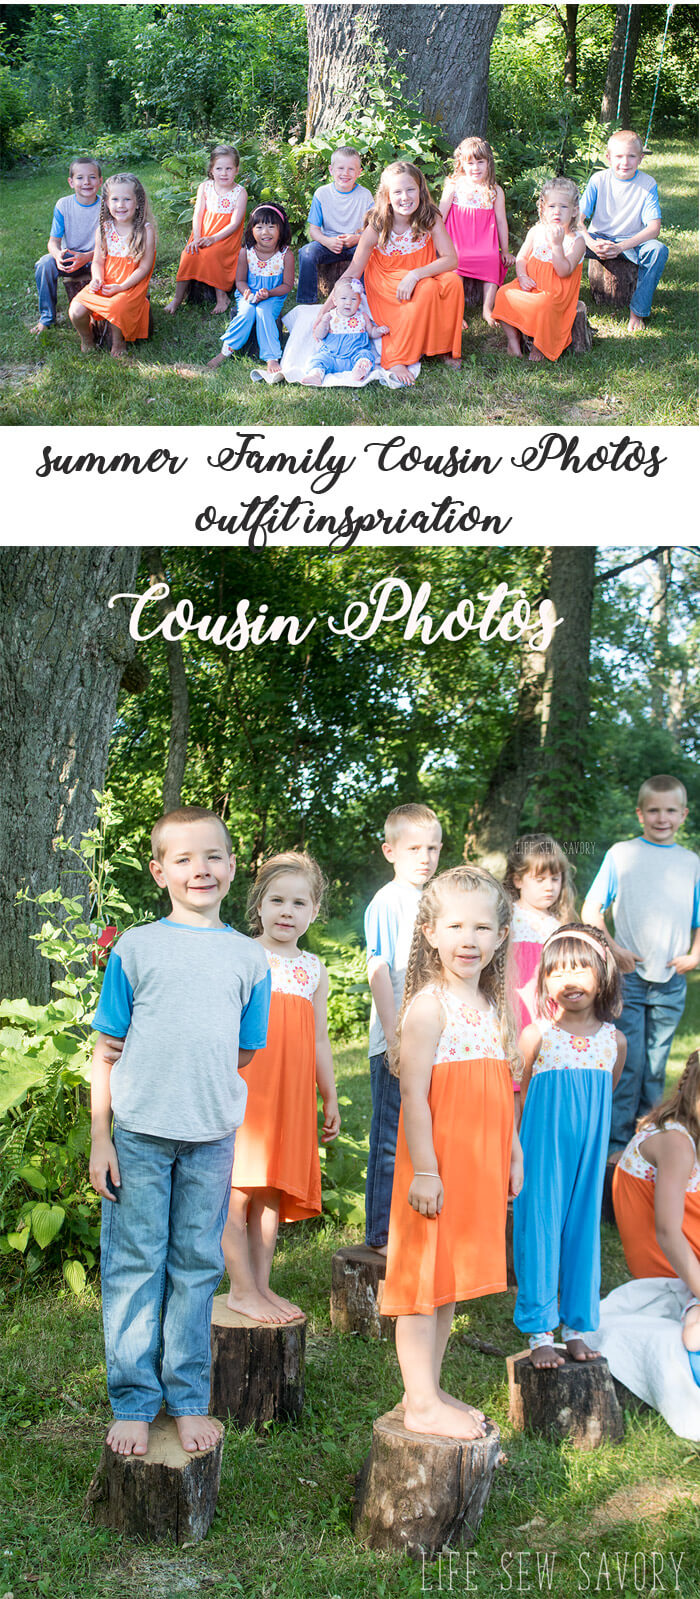 coordinating outfits for cousins from sewing inspiration from Life Sew Savory